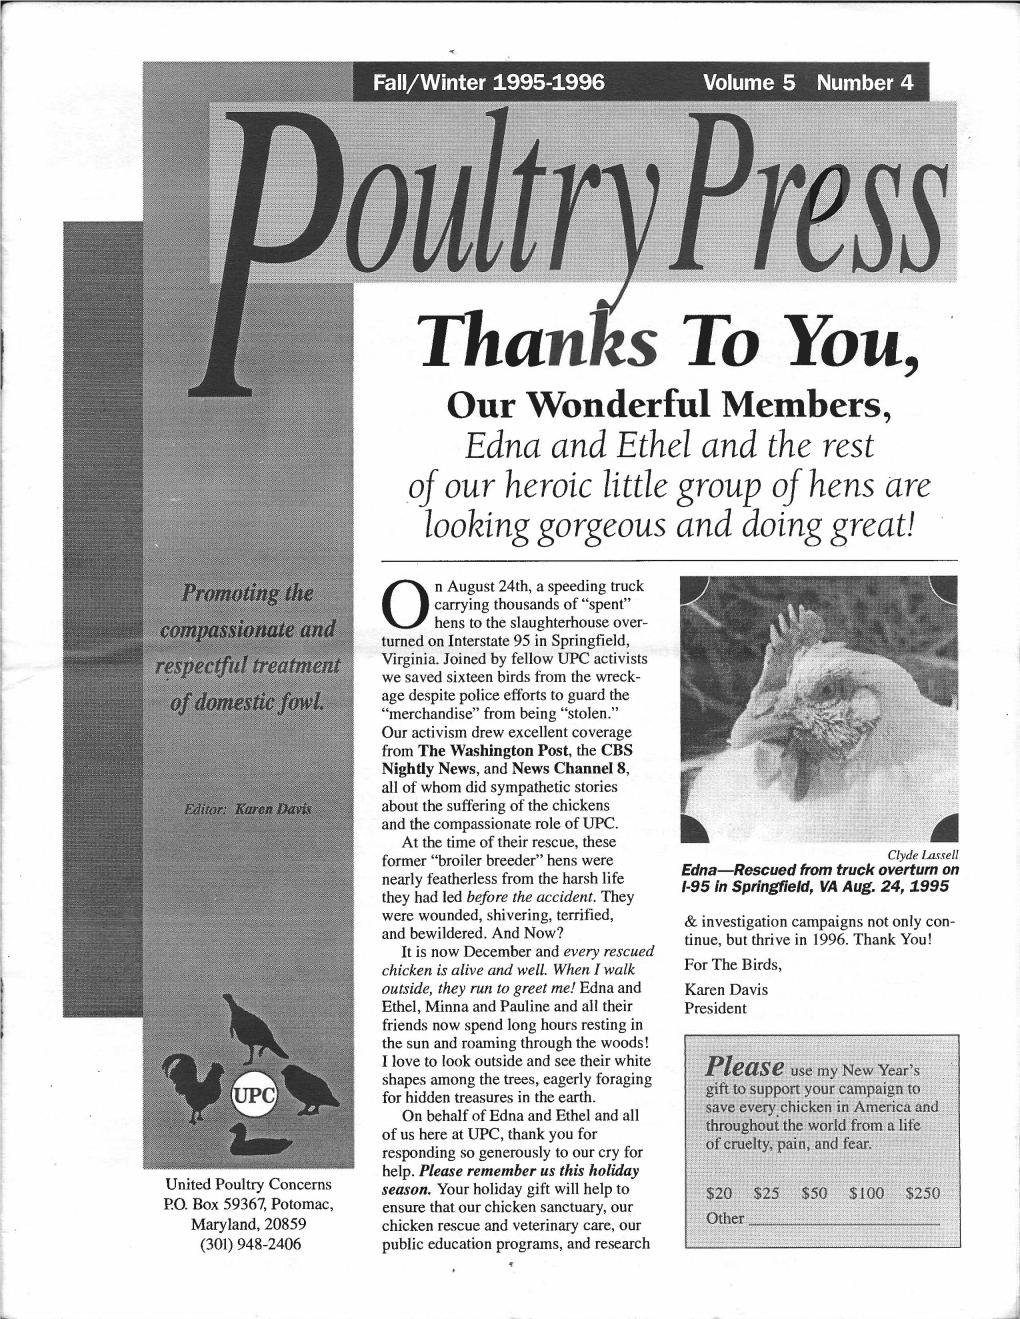 UPC Fall/Winter 1995-1996 Poultry Press